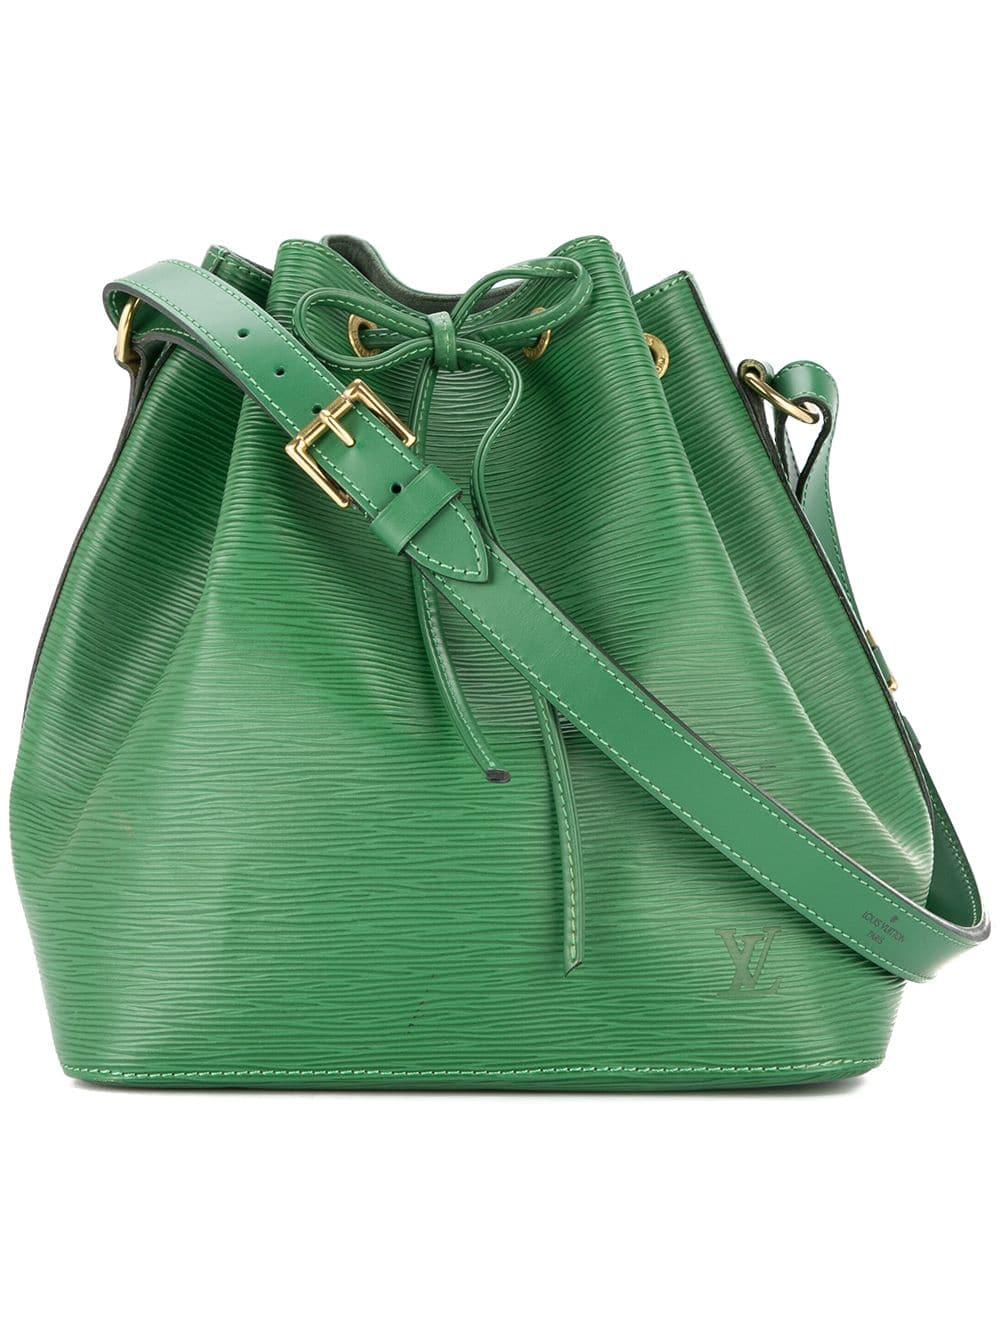 Louis Vuitton Pre-Owned Leather Petit Noe Bucket Bag in Green | Lyst Canada